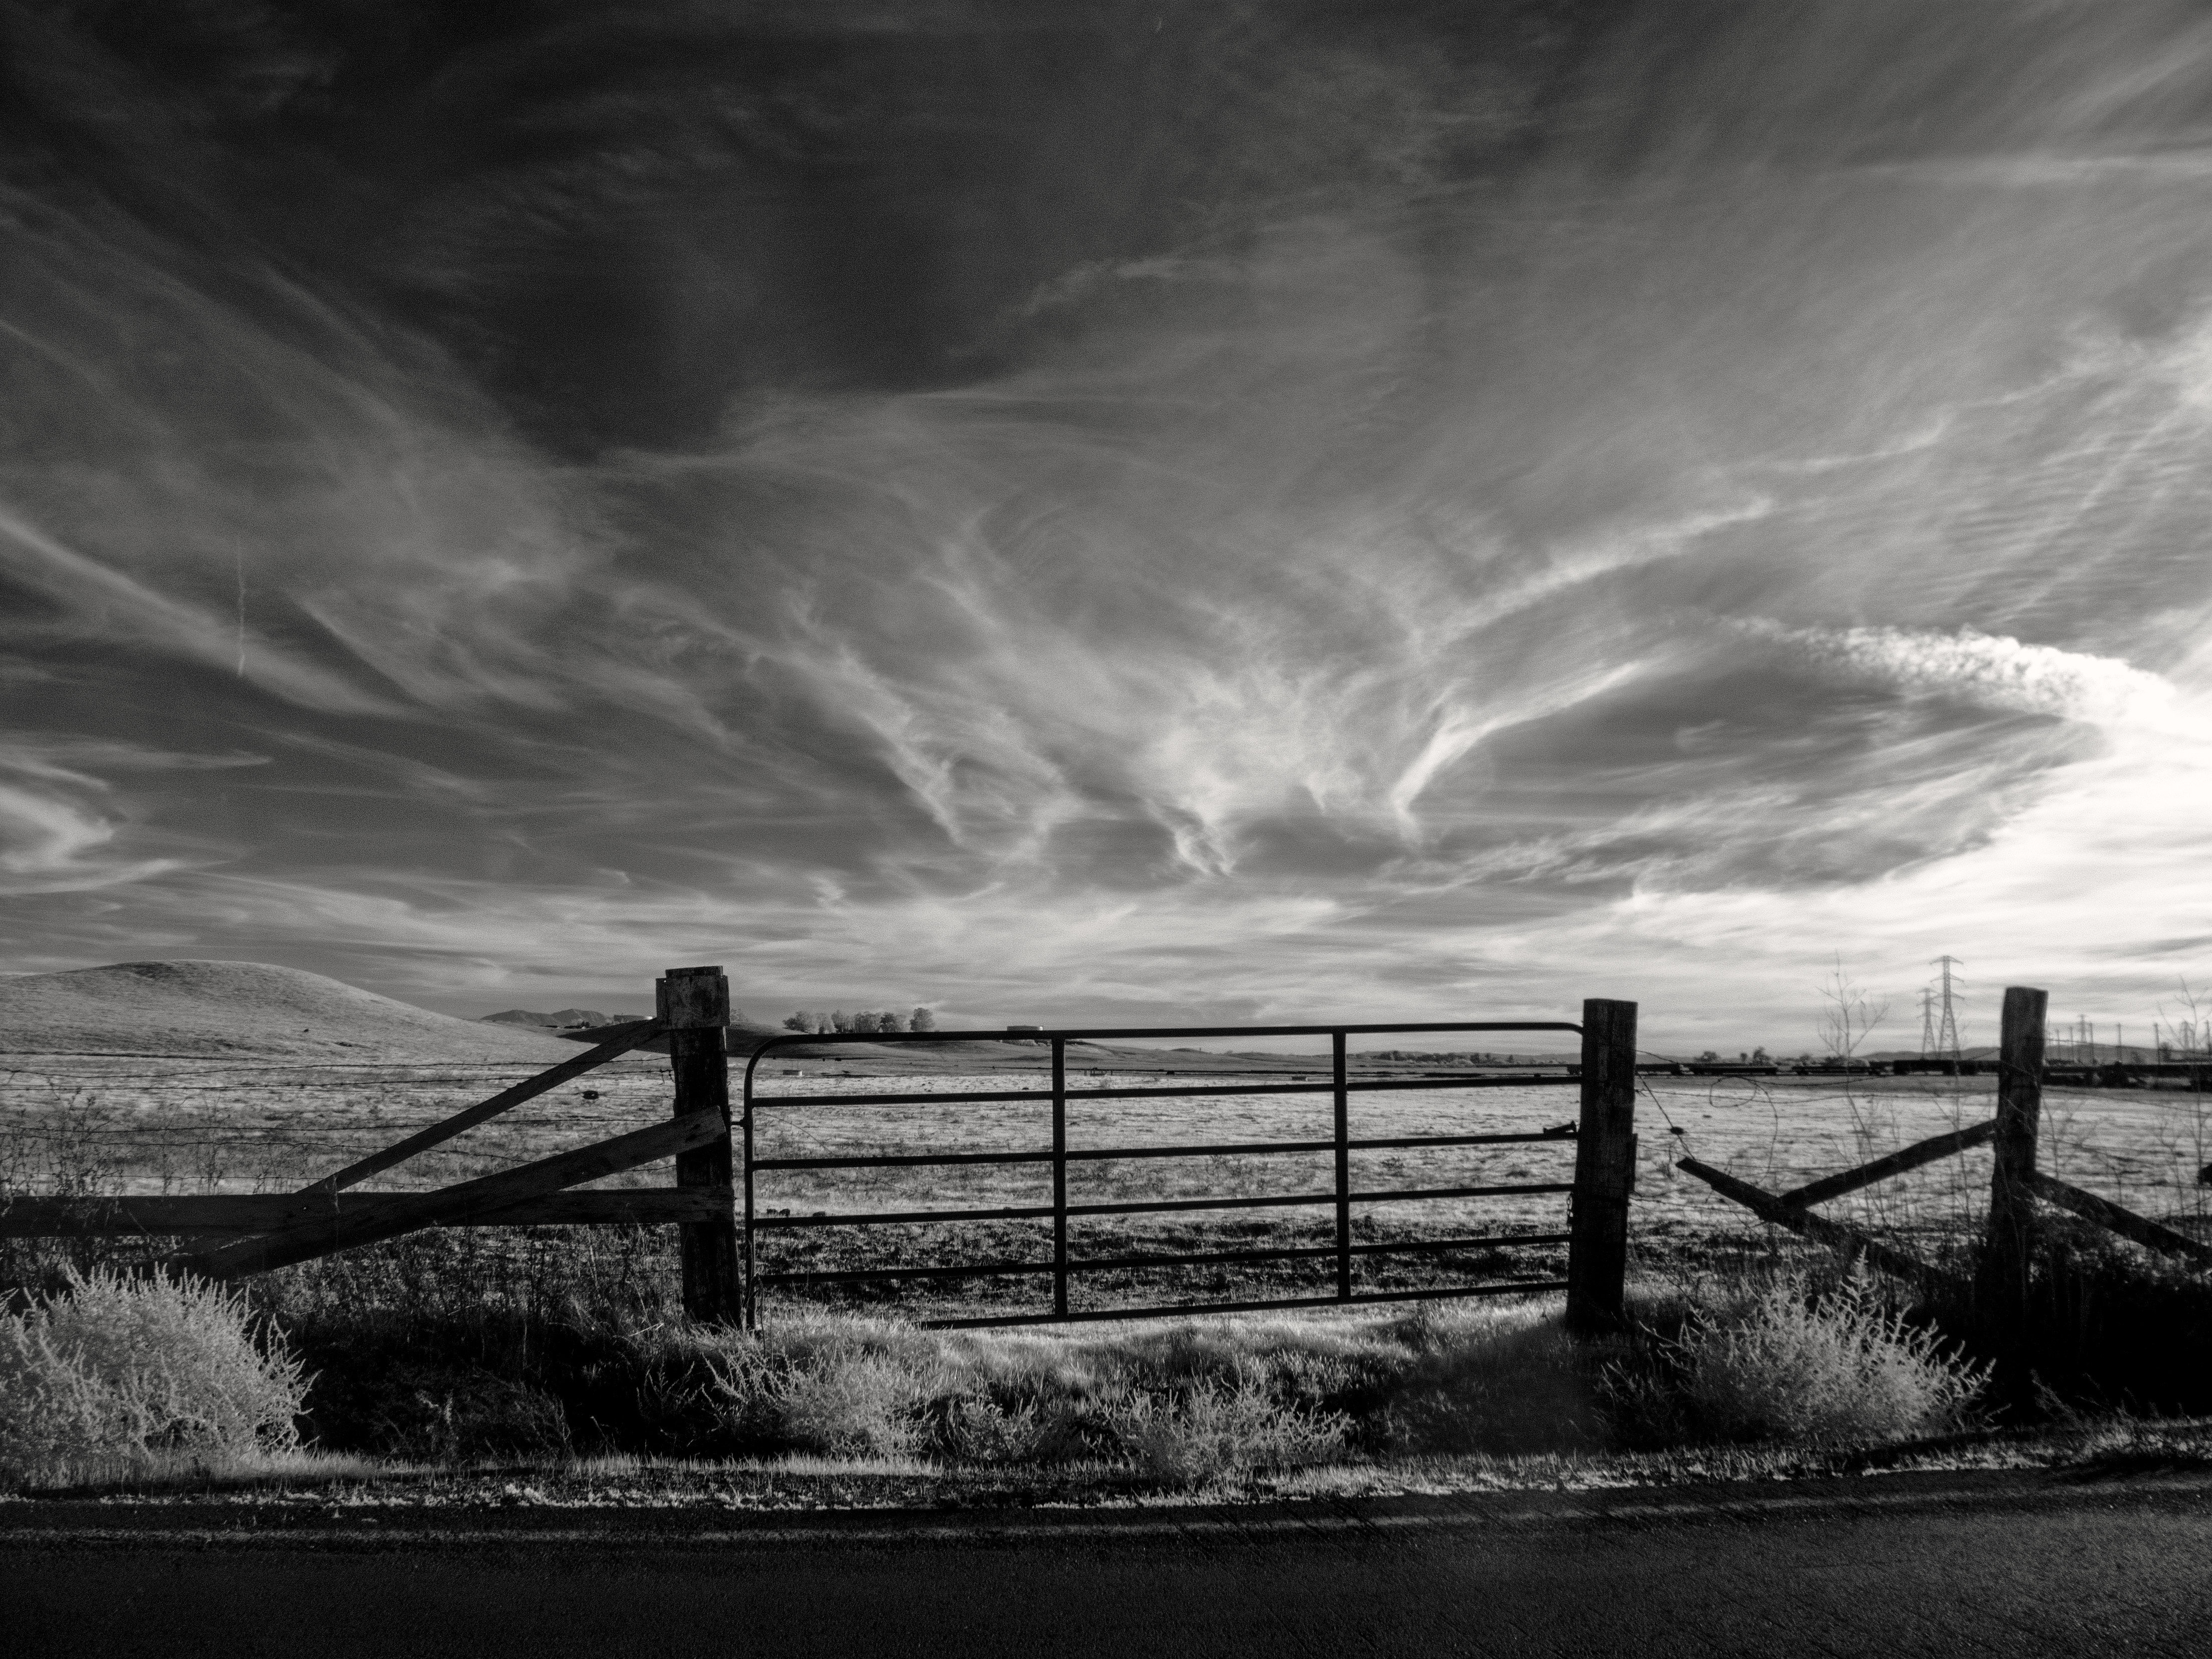 New Lock Screen Wallpapers nature, sky, fence, bw, chb, gate, goal